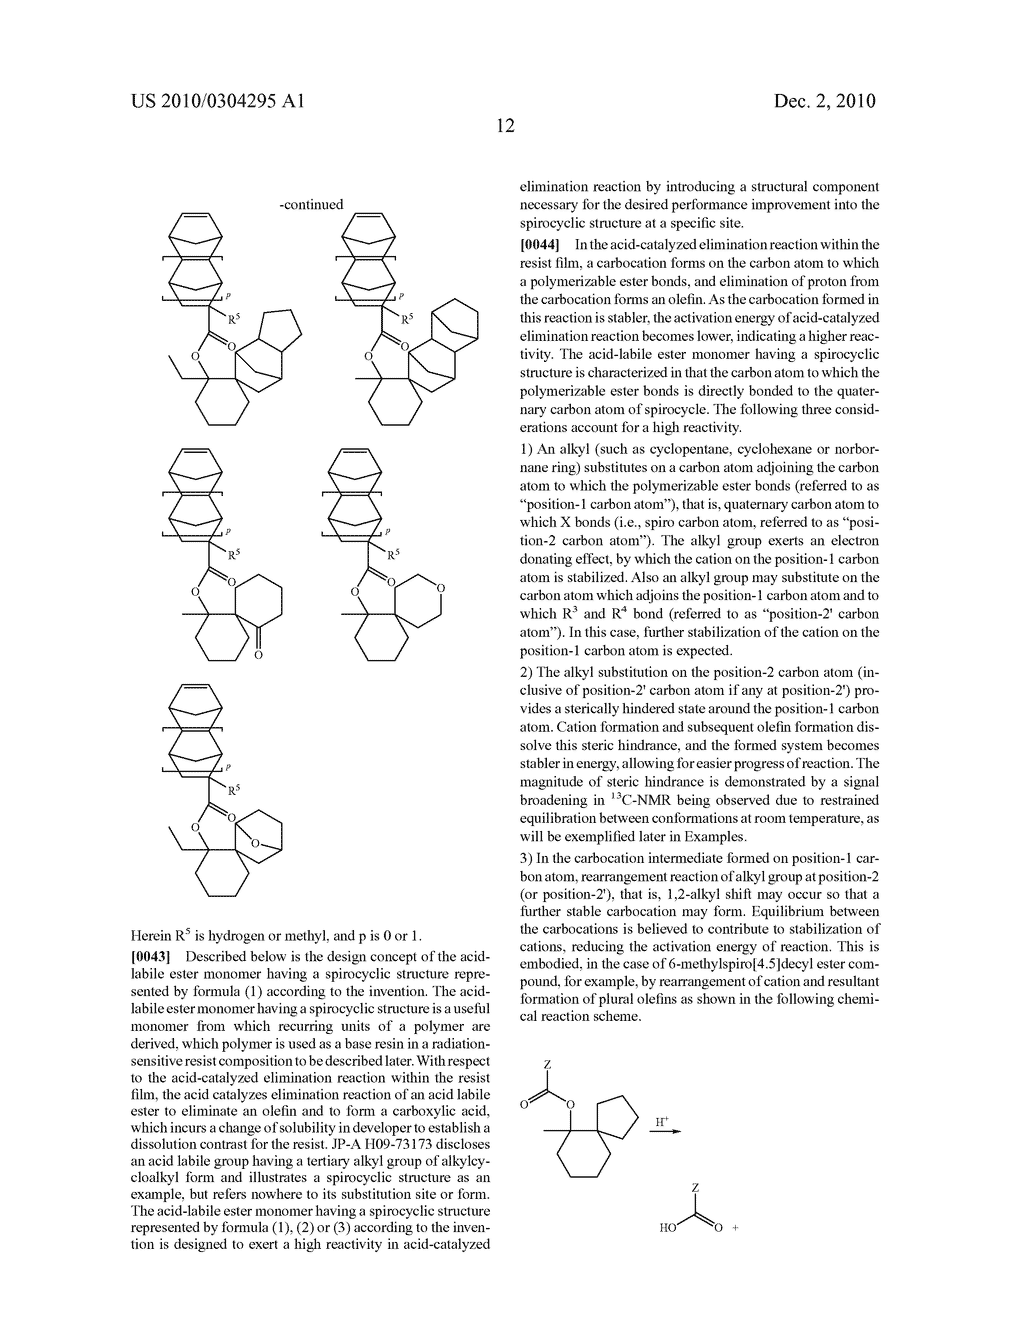 ACID-LABILE ESTER MONOMER HAVING SPIROCYCLIC STRUCTURE, POLYMER, RESIST COMPOSITION, AND PATTERNING PROCESS - diagram, schematic, and image 13